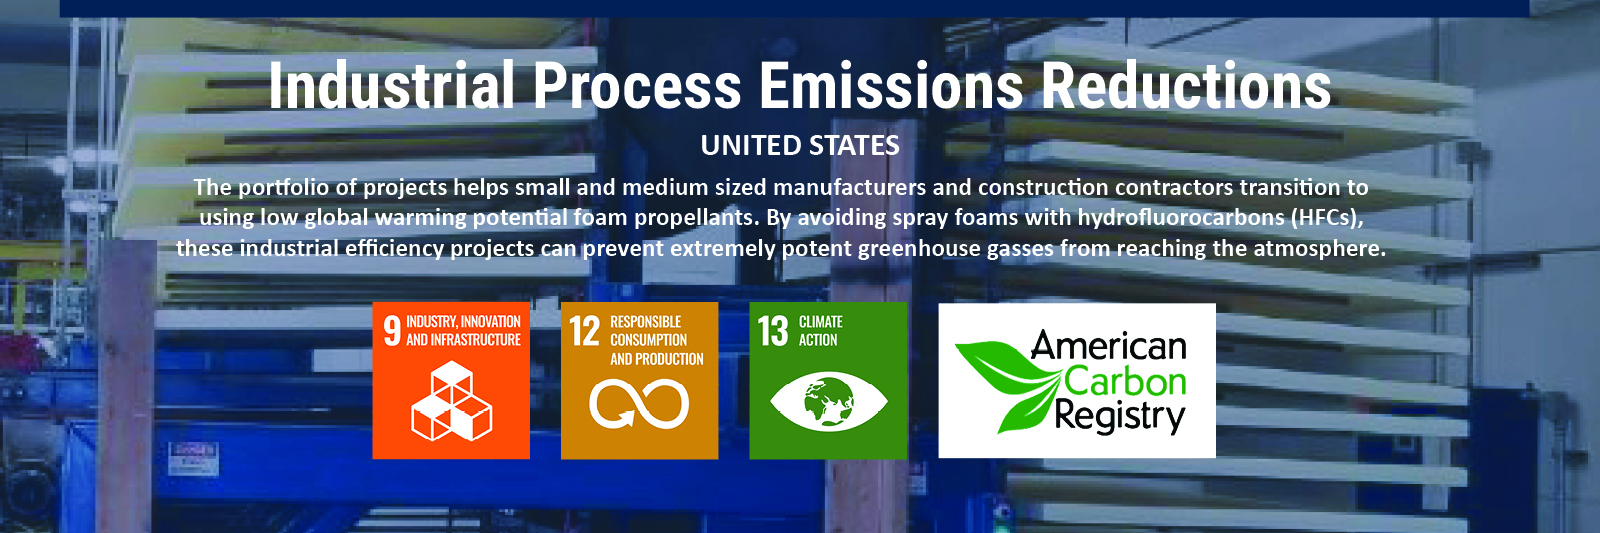 Industrial process emissions reductions project